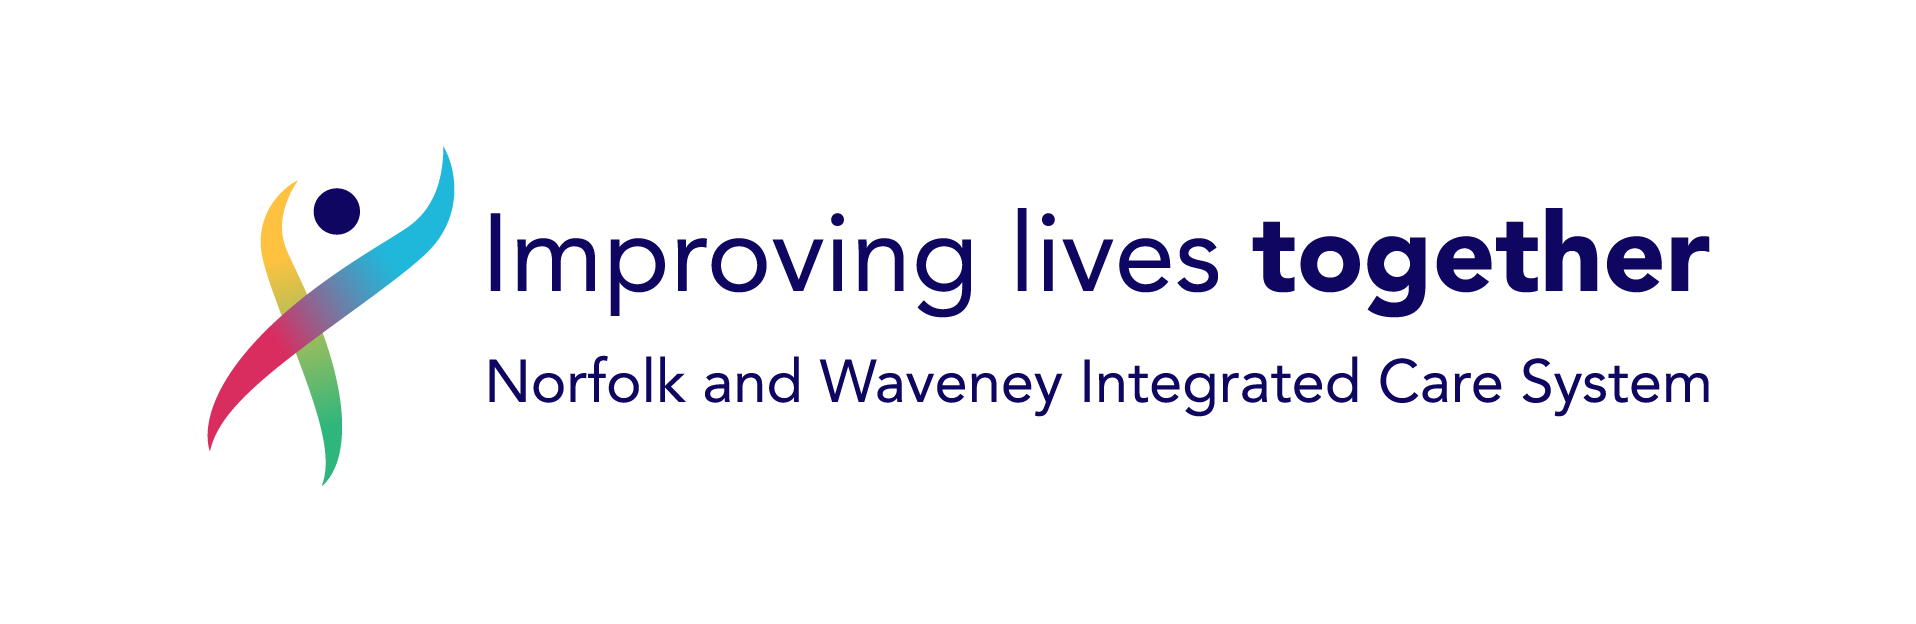 Norfolk and Waveney Integrated Care logo